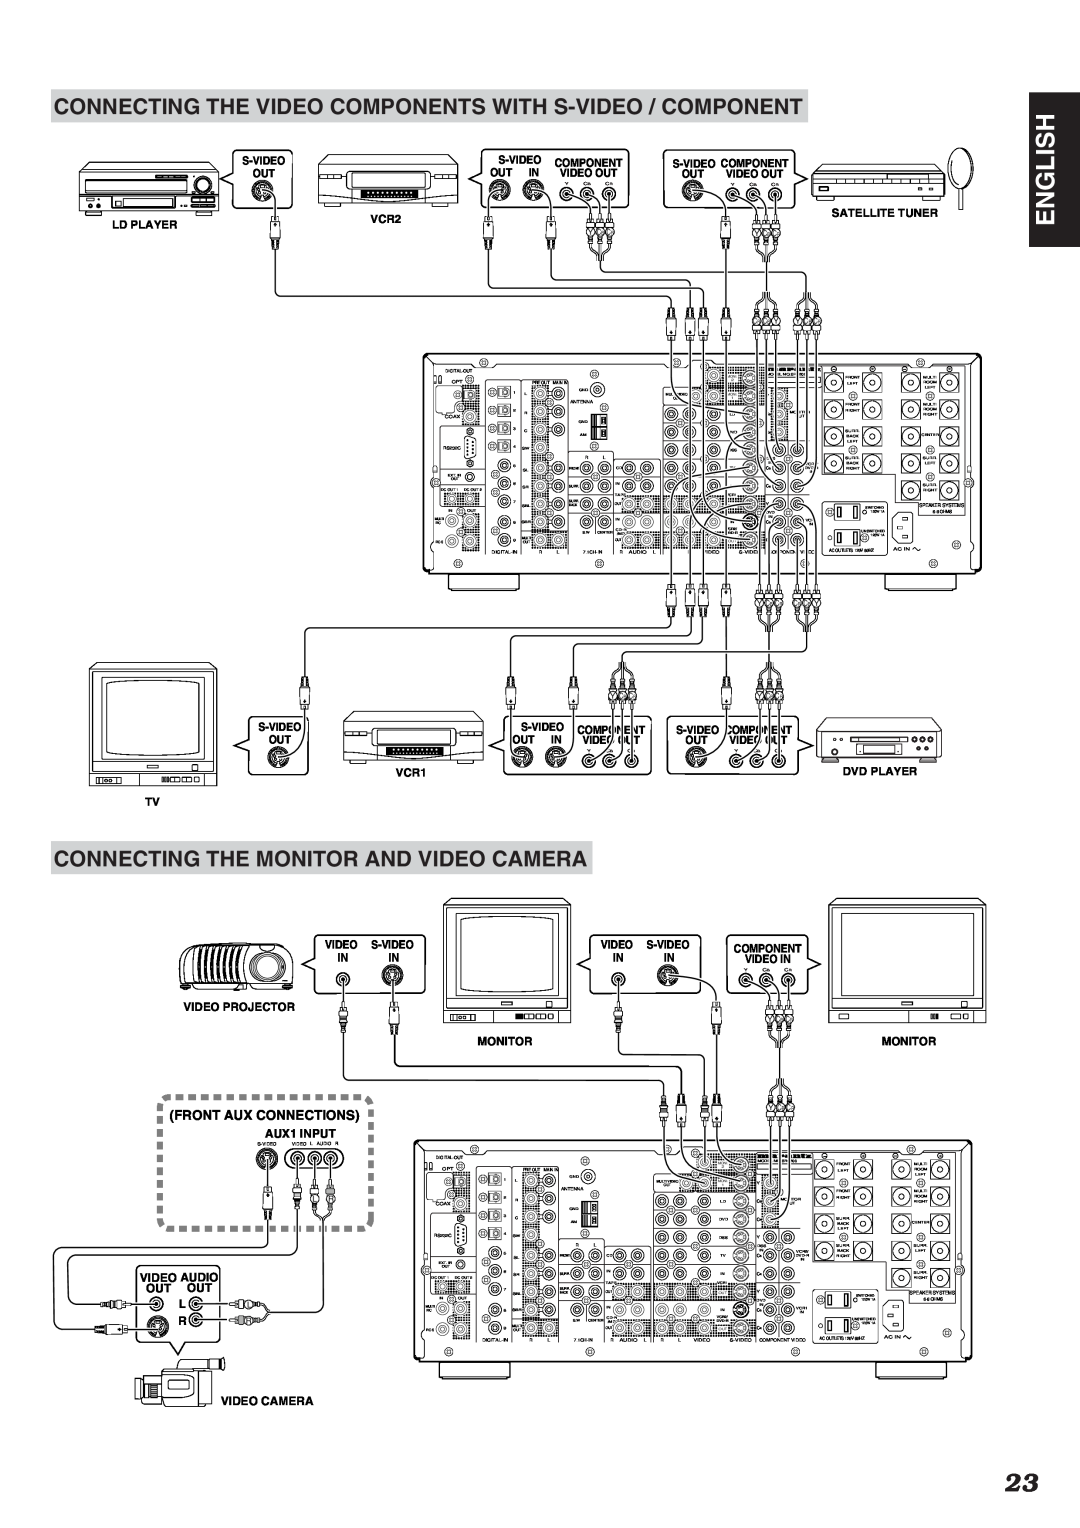 Marantz SR9200 manual English, Connecting The Monitor And Video Camera, Front Aux Connections 